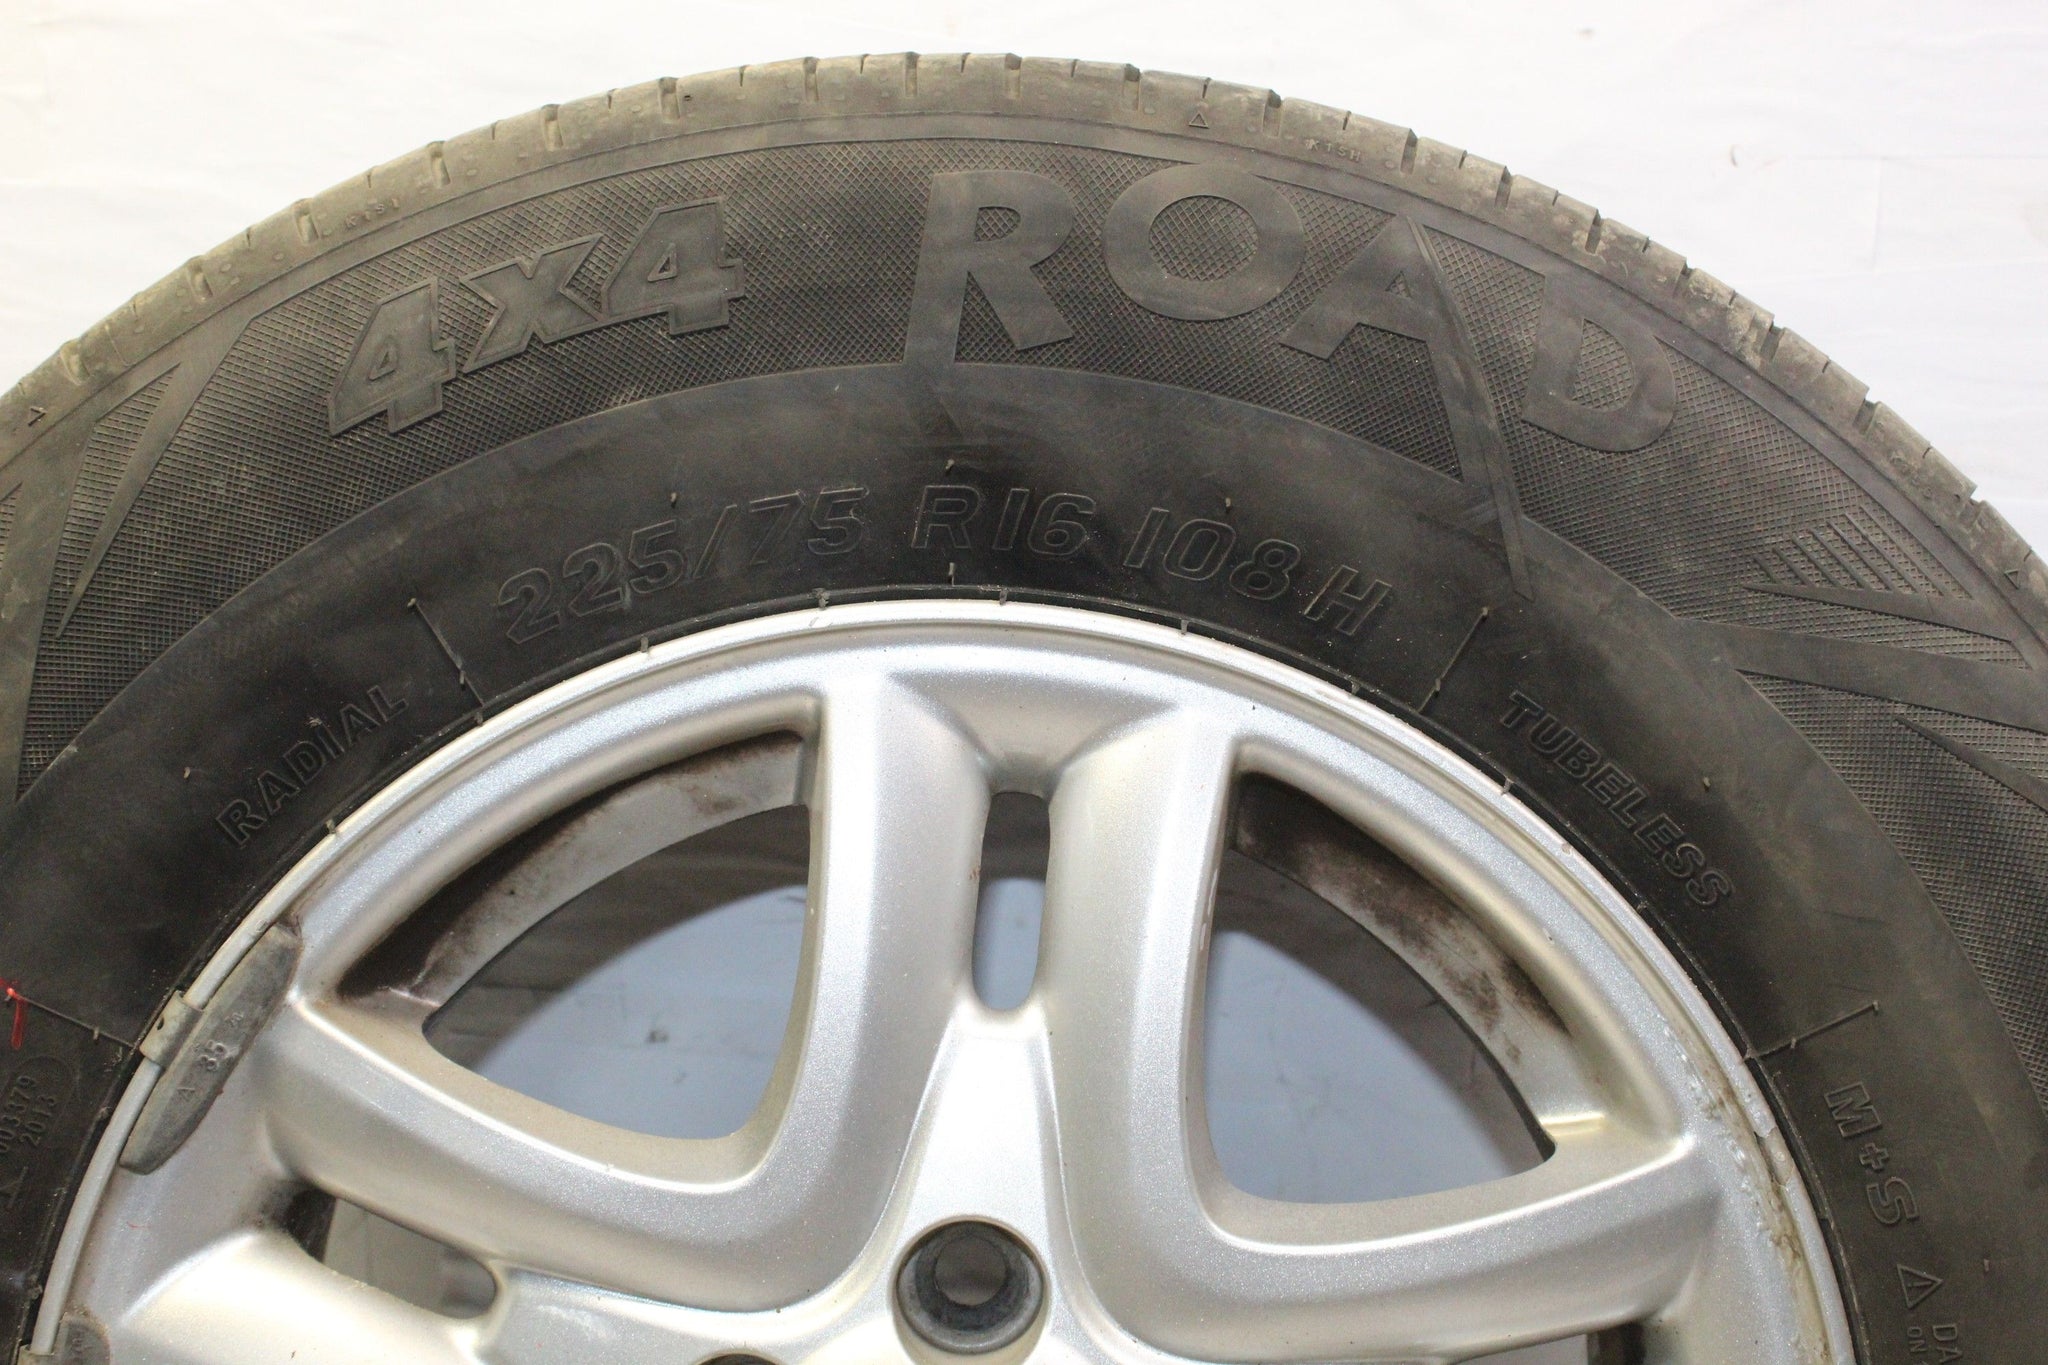 2007 Land Rover Freelander 2 ALLOY WHEEL WITH TYRE 225 / 75 R16 5.3MM